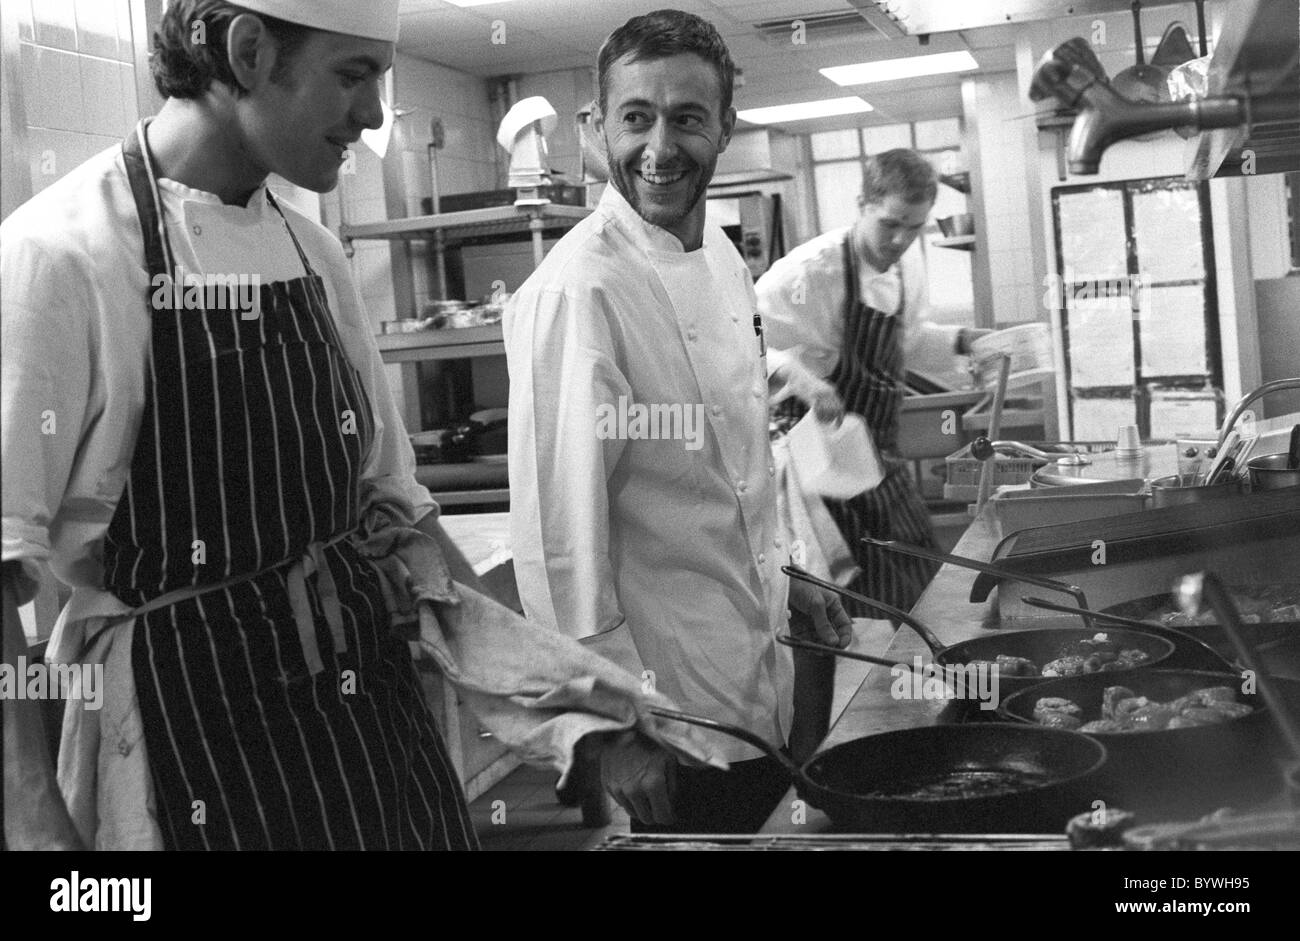 Chef Michel Roux at Le Gavroche chatting with one of his sous chefs Stock Photo